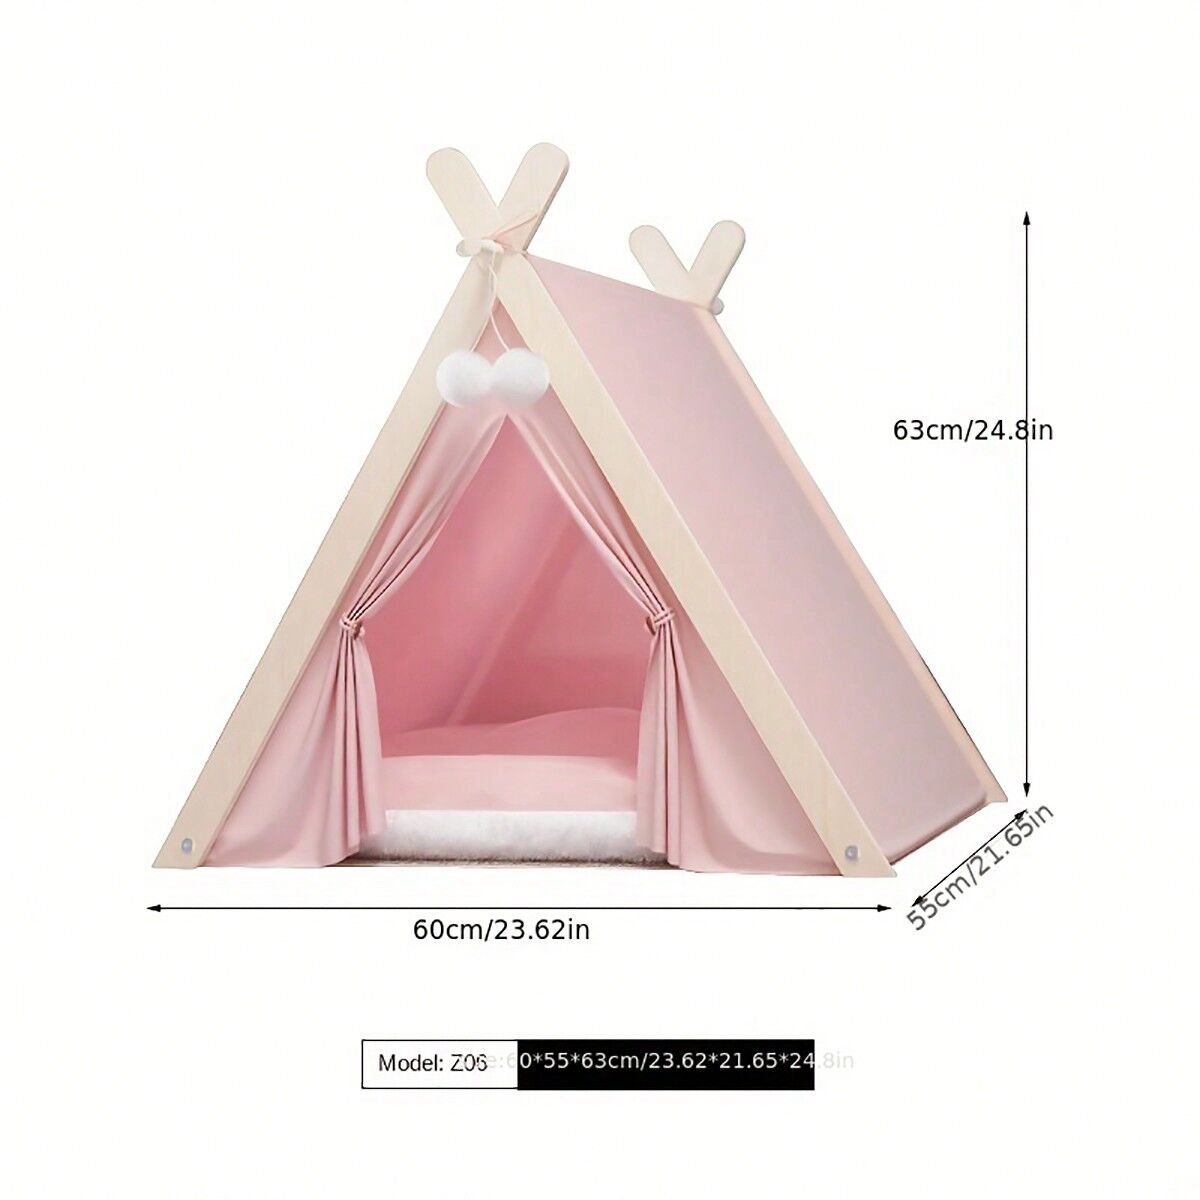 SHEIN Pet Teepee, Portable Pet Tents for Small Dogs or Cats, Puppy Sweet Bed Washable Dog or Cat Houses with Cushion Pink L